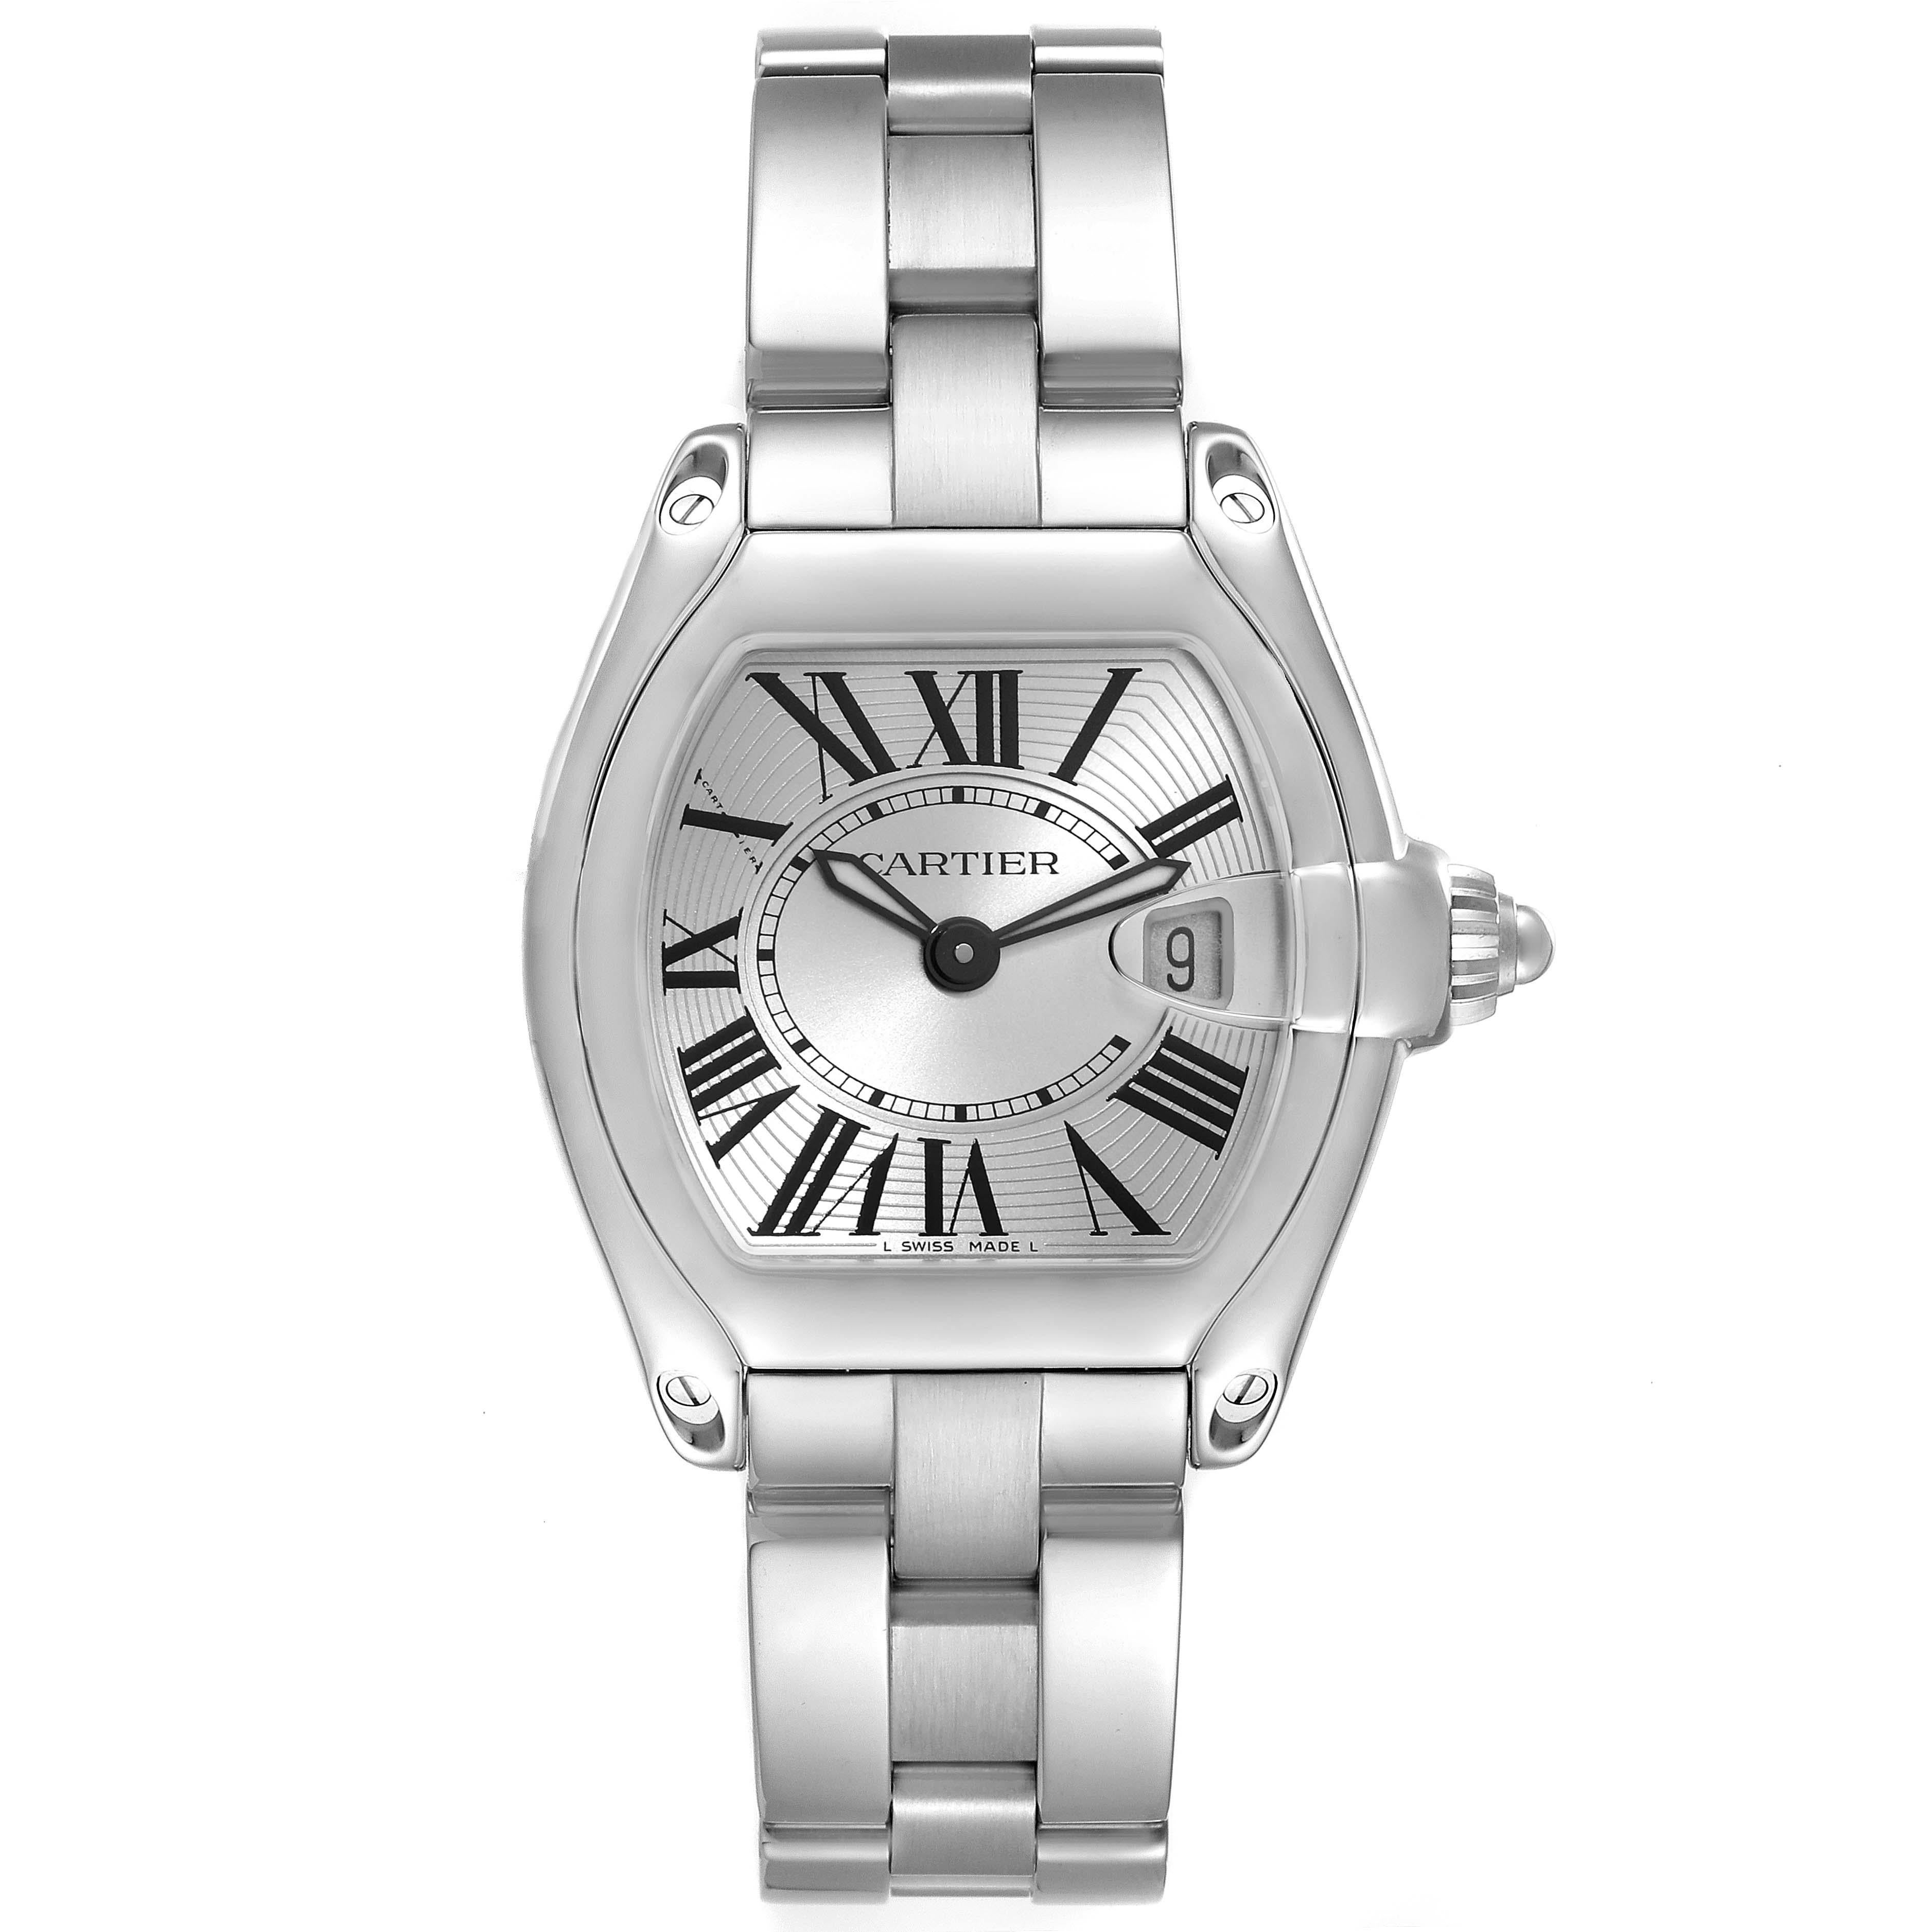 Cartier Roadster Small Silver Dial Steel Ladies Watch W62016V3 Box Papers. Swiss quartz movement calibre 688. Stainless steel tonneau shaped case 36 x 30 mm. . Scratch resistant sapphire crystal with cyclops magnifier. Silver sunray effect dial with